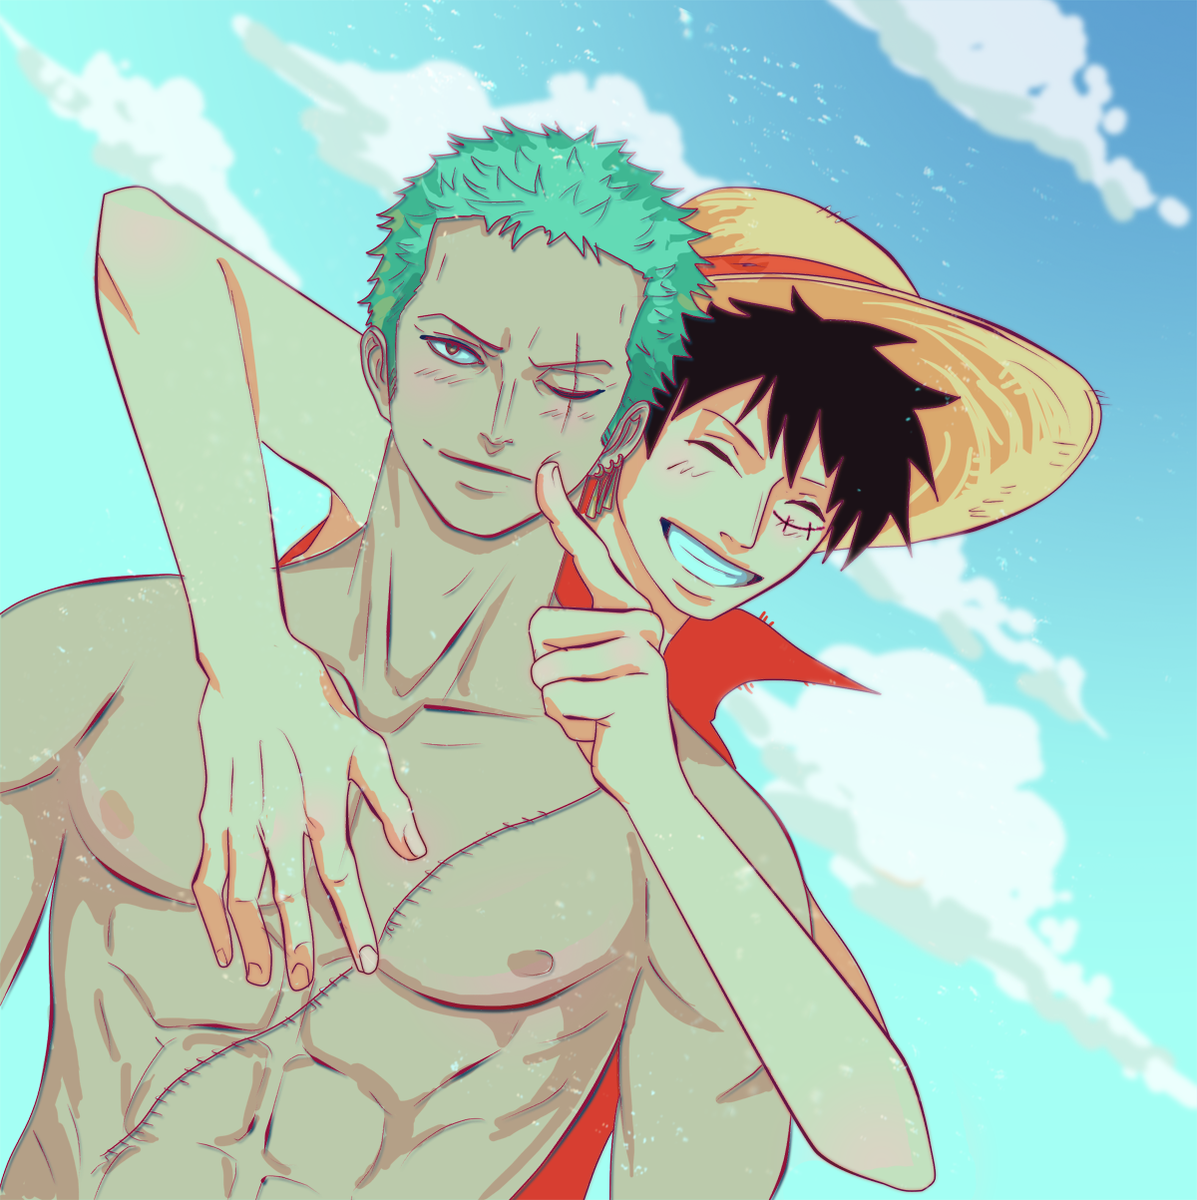 my art #ONEPIECE #ONEPIECE20th #luffy #zoro https://t.co/38OHWDwETE. 